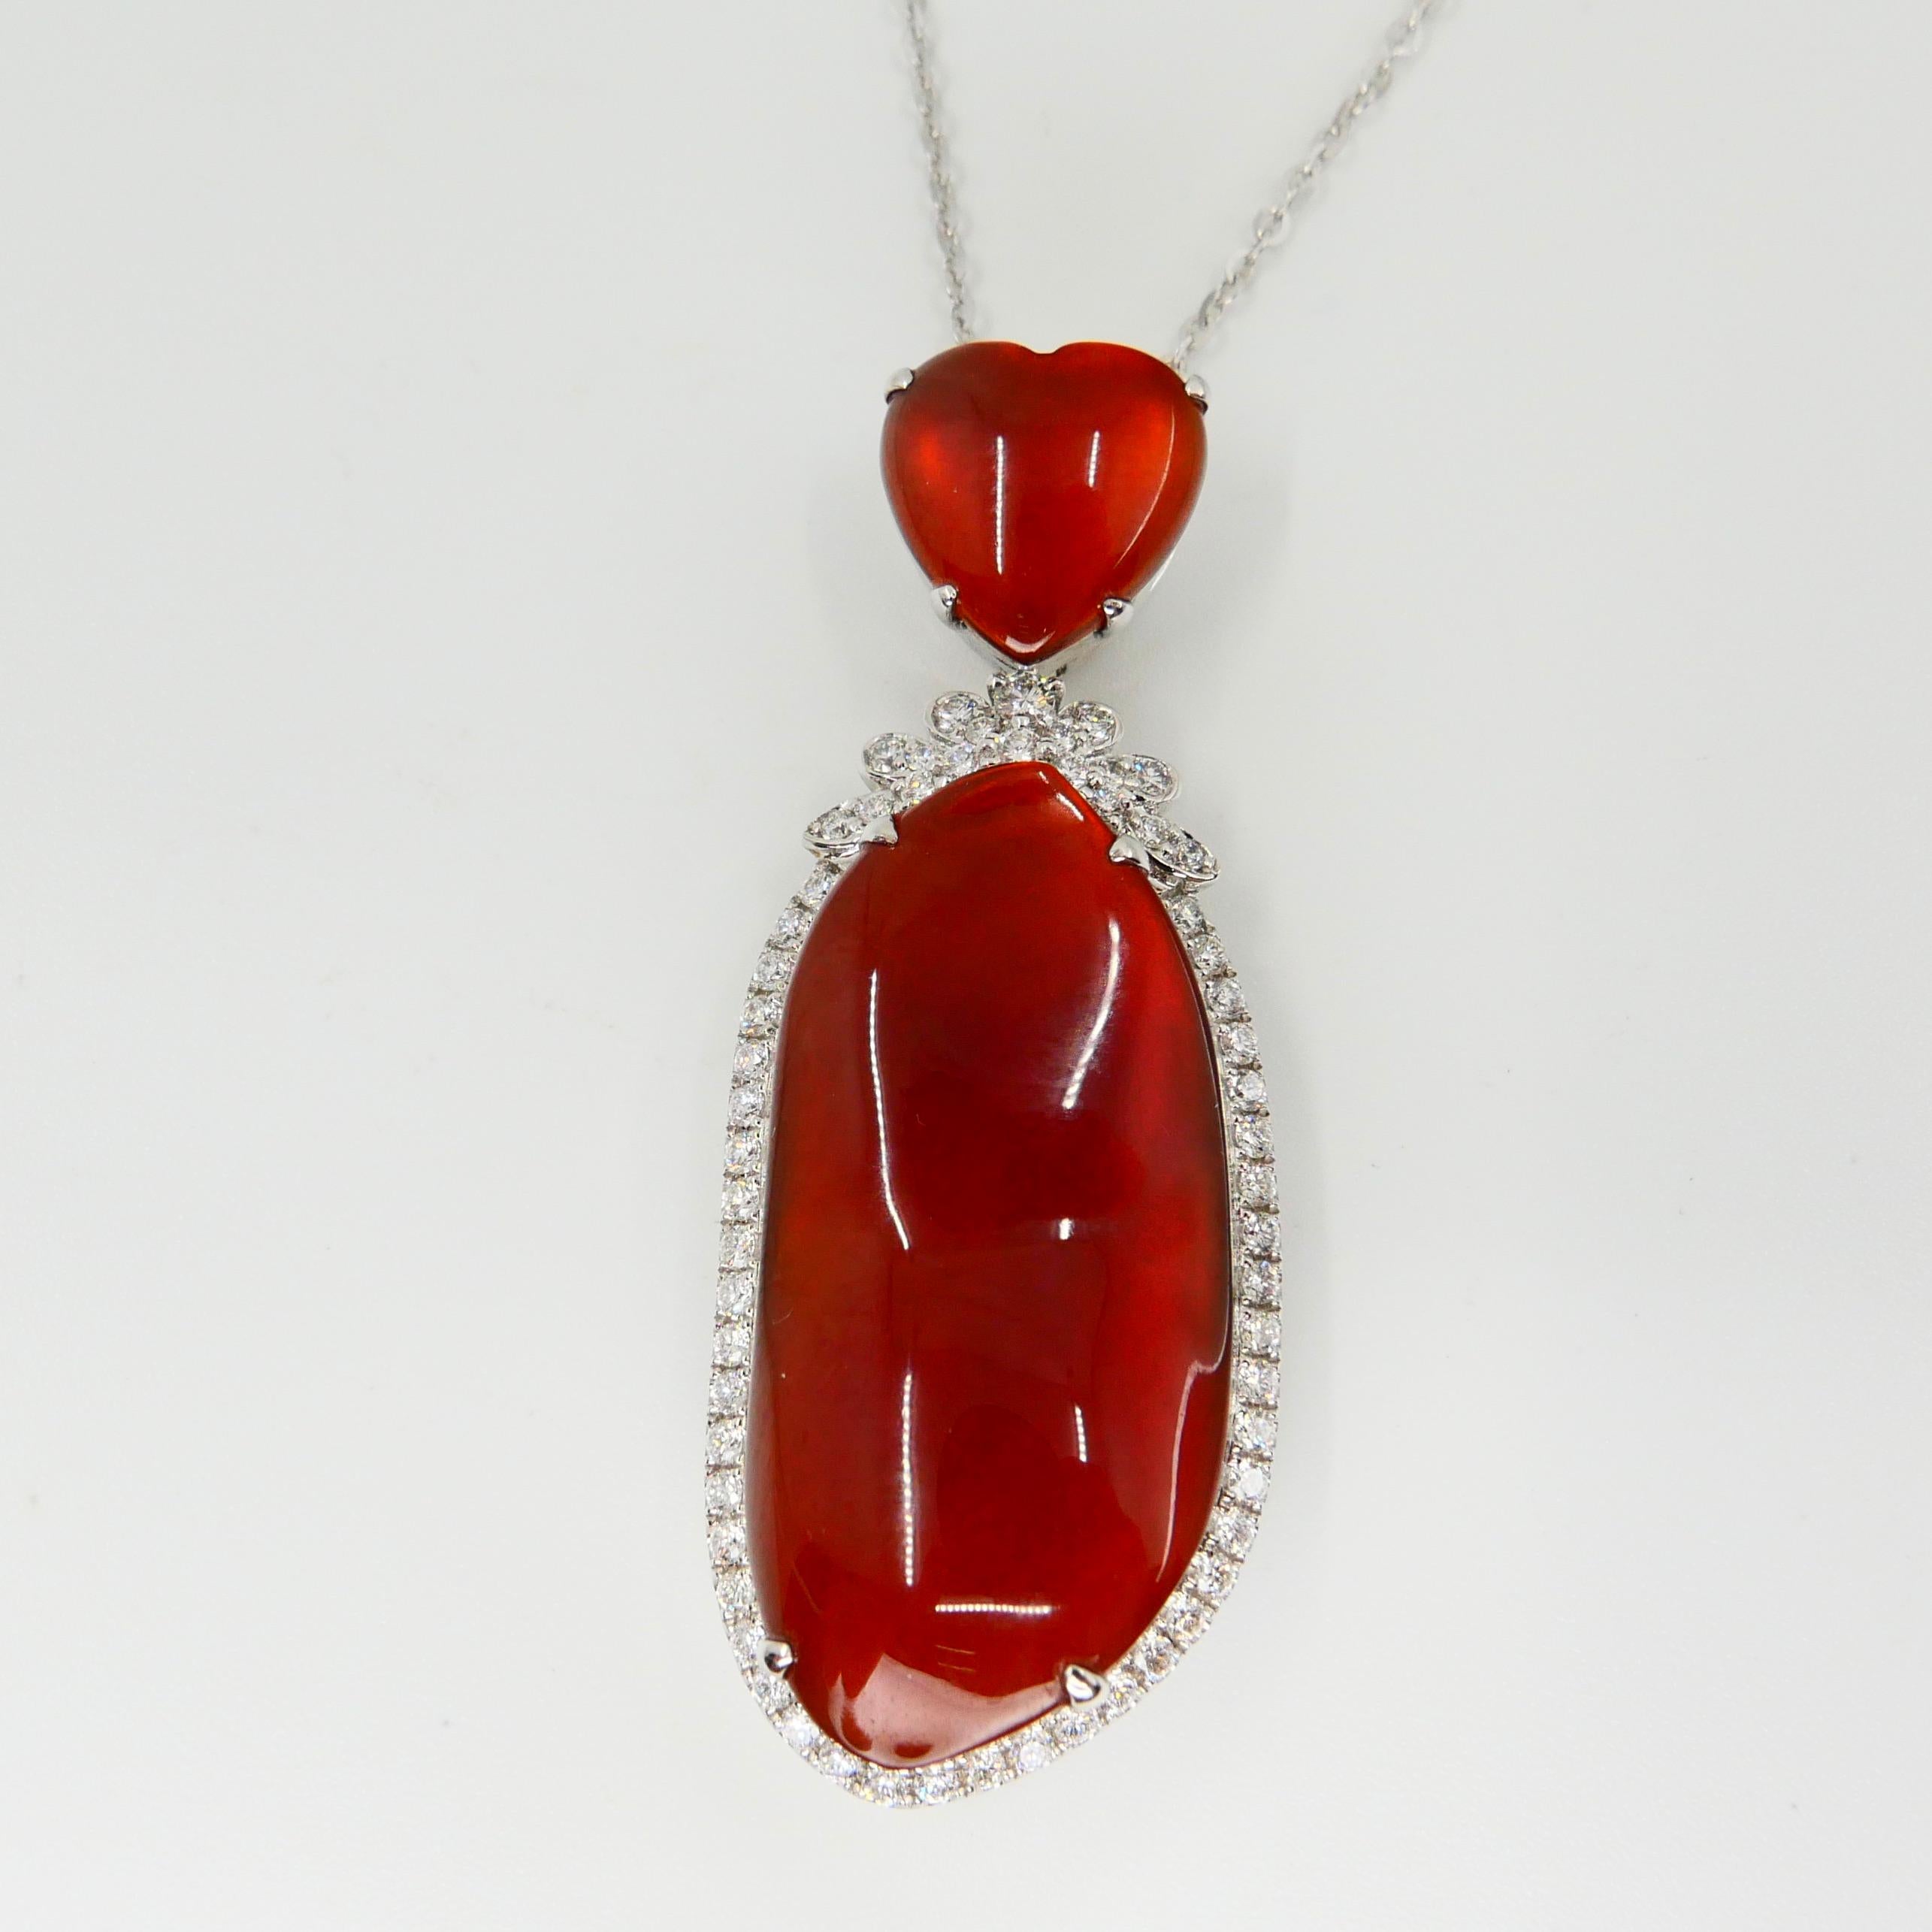 Rough Cut Important GIA Certified Jadeite & Diamond Pendant Necklace Imperial Red Jade